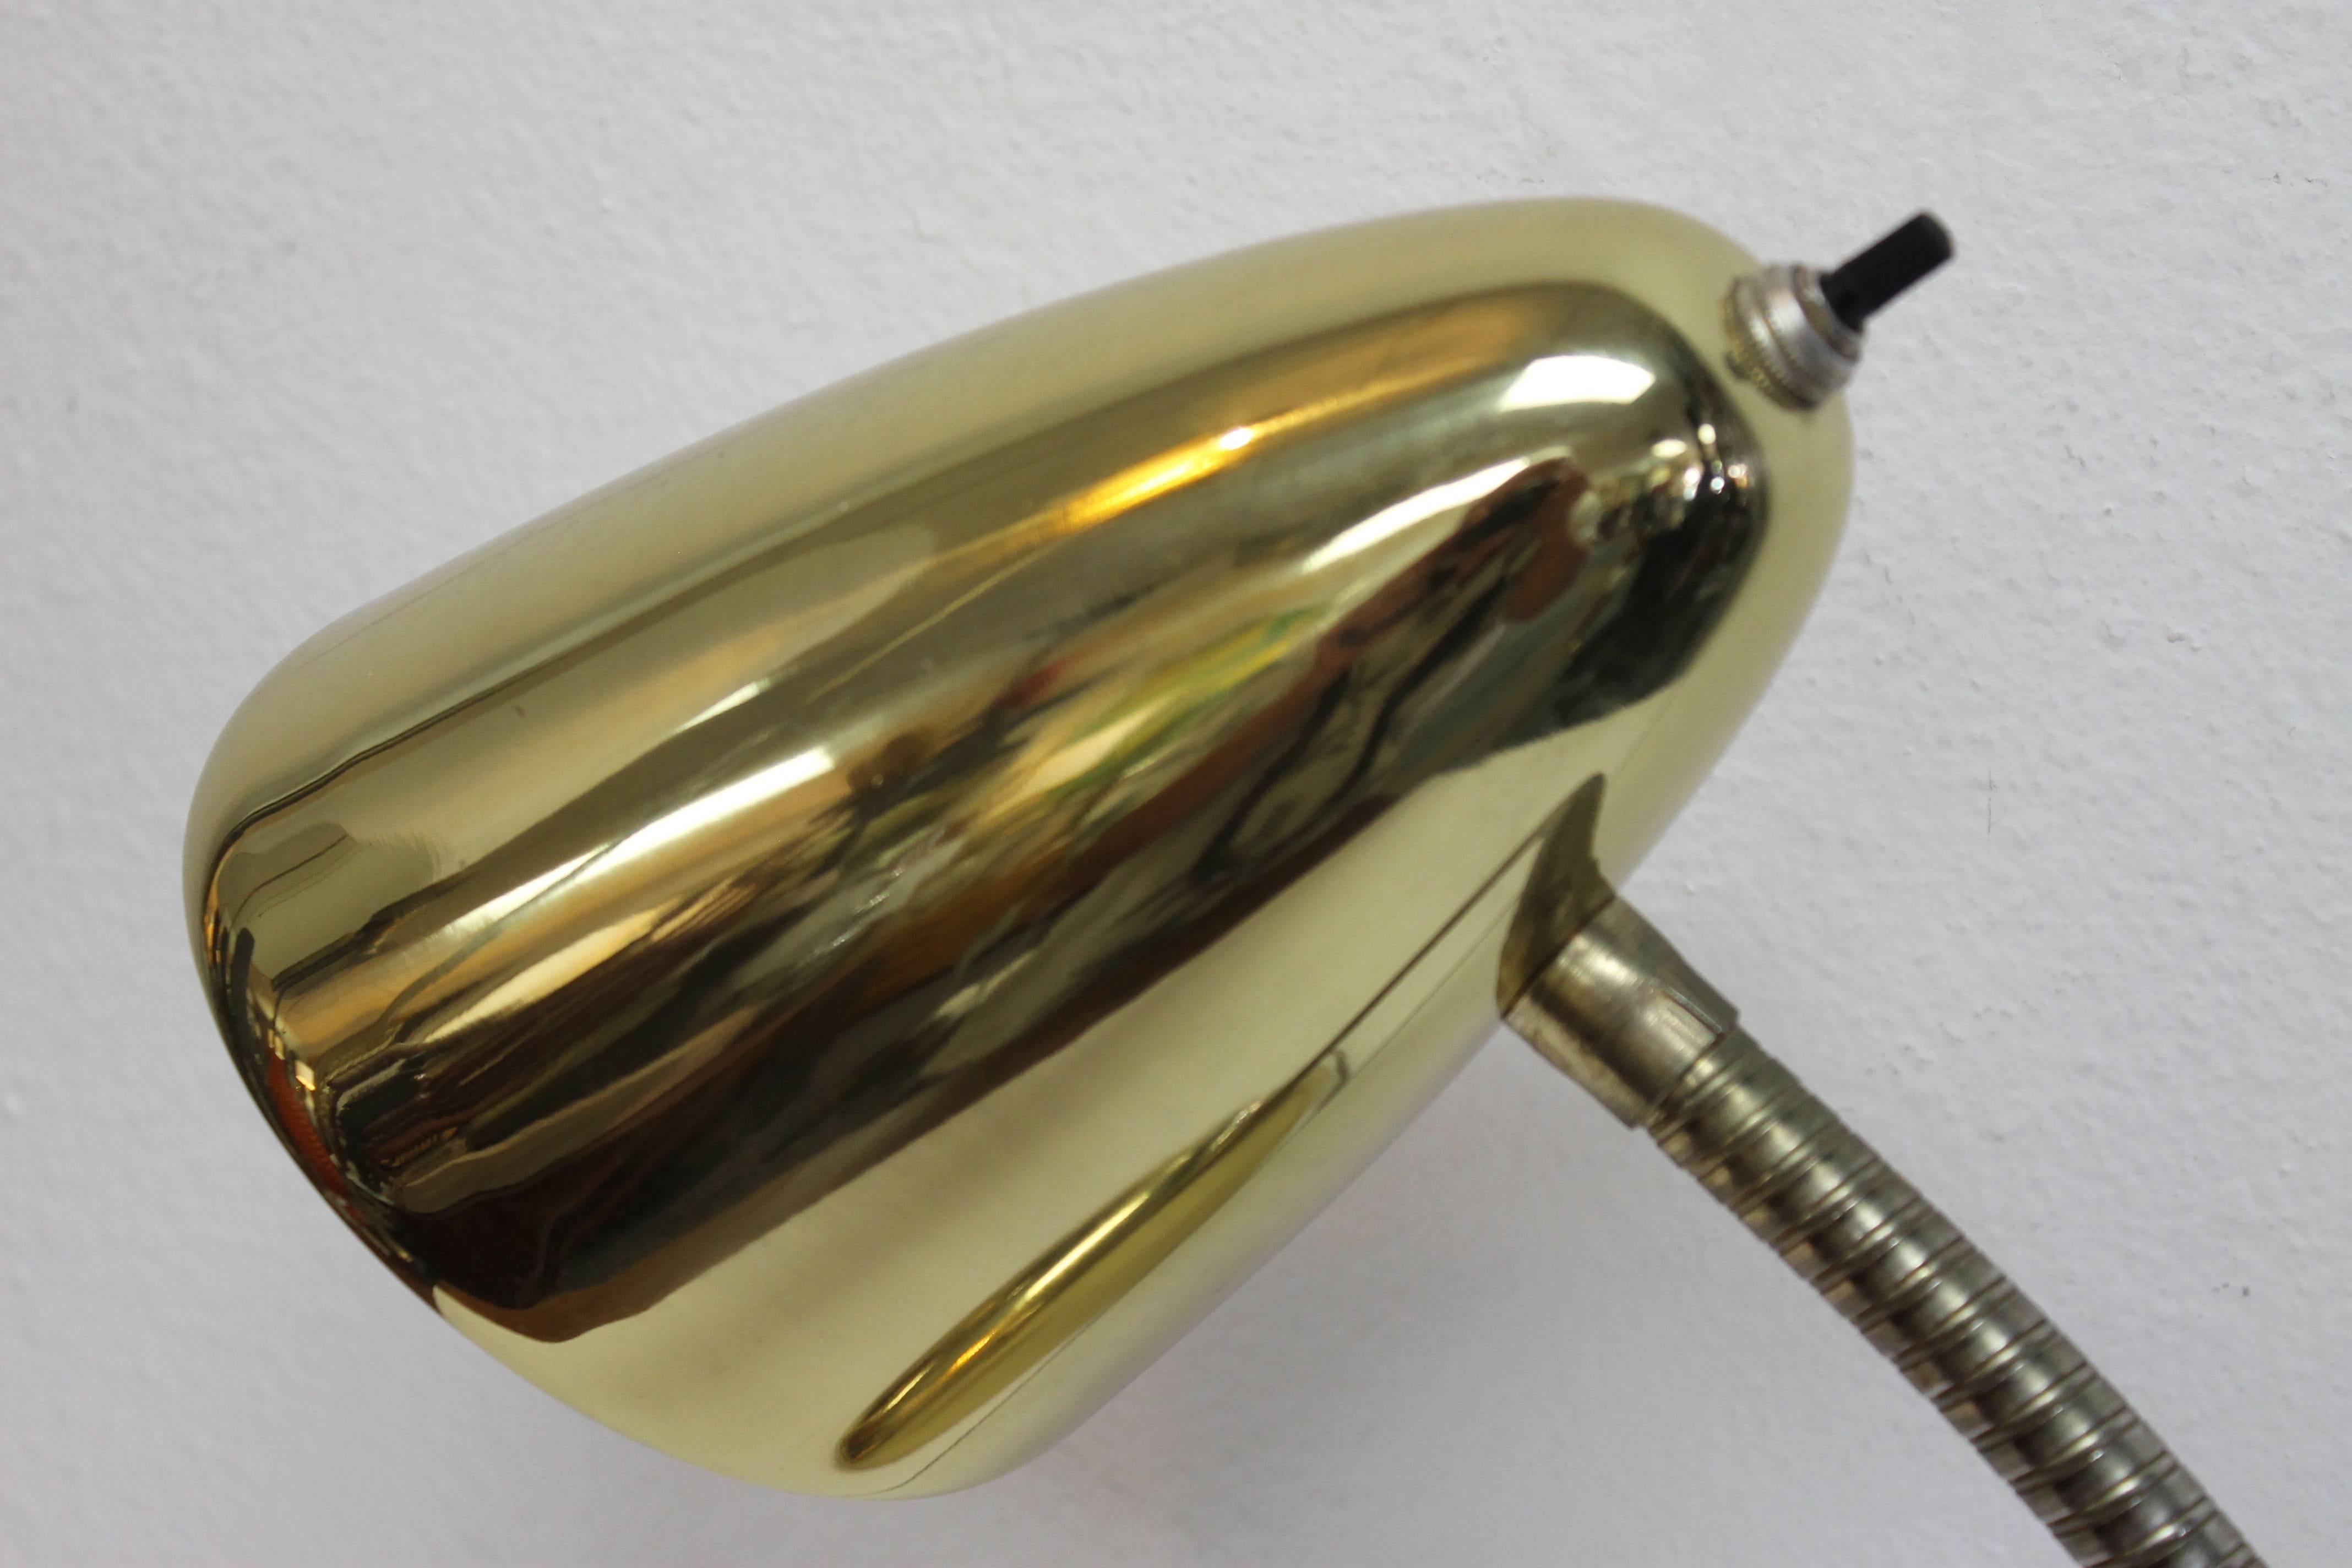 Brass-plated steel goose neck table lamp. Measures (as shown) 18